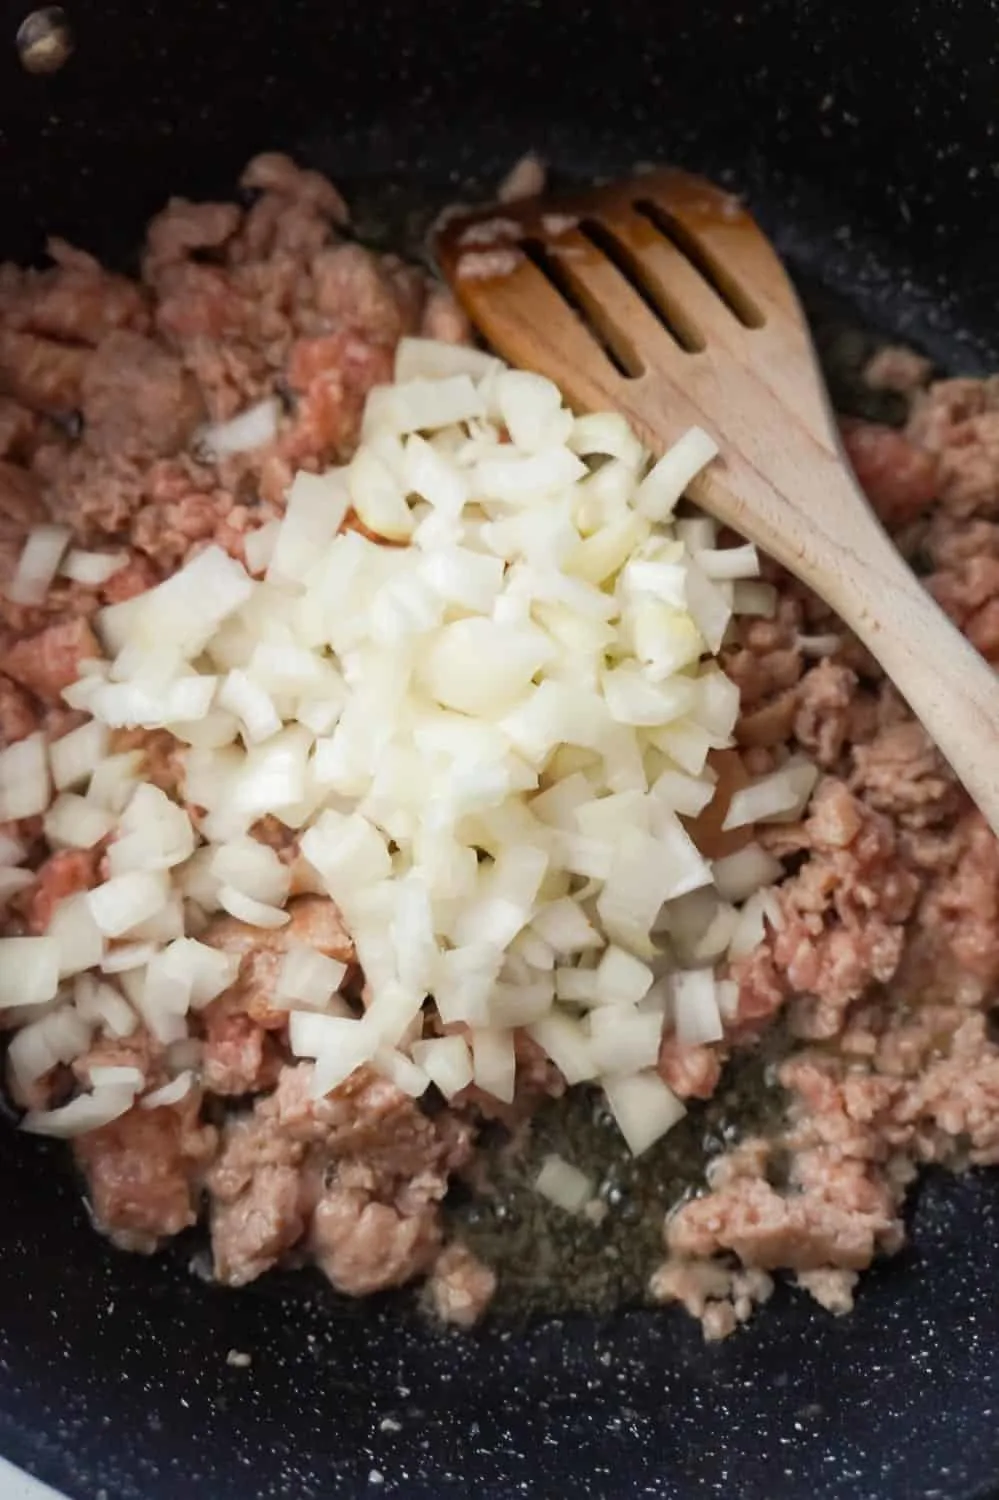 diced onions on top of raw ground sausage meat in a frying pan